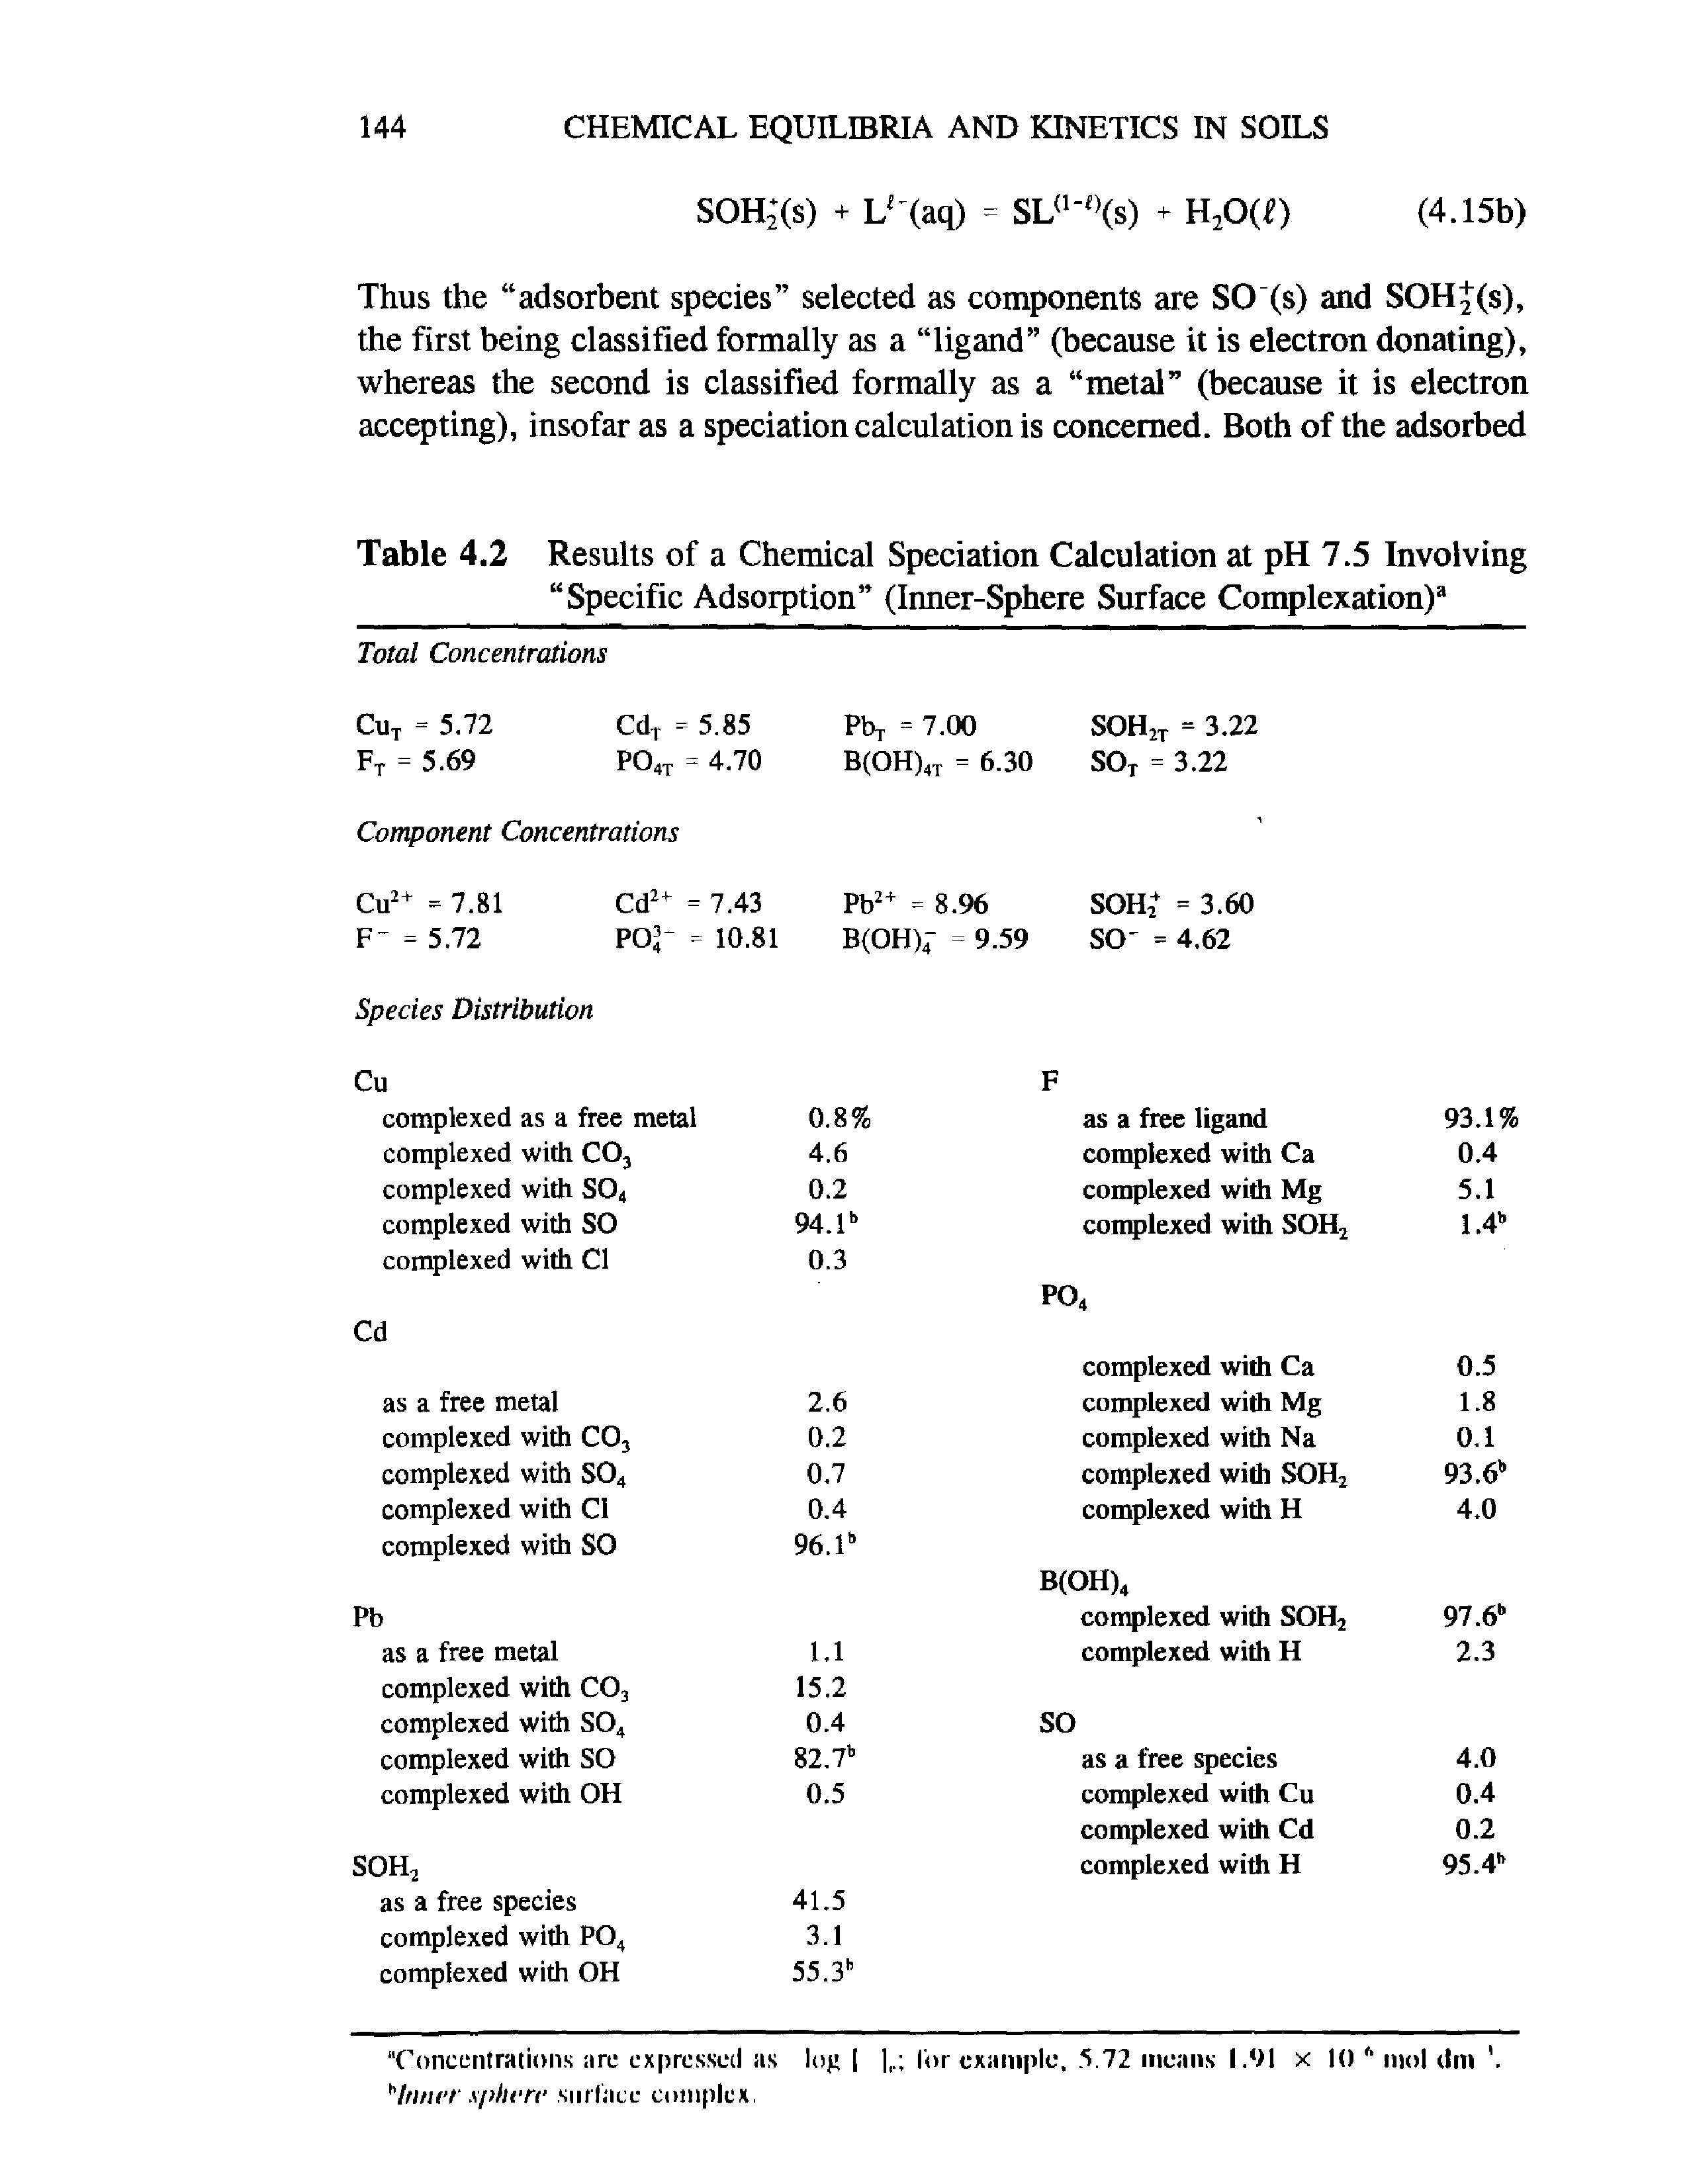 Table 4.2 Results of a Chemical Speciation Calculation at pH 7.5 Involving Specific Adsorption (Inner-Sphere Surface Complexation)3...